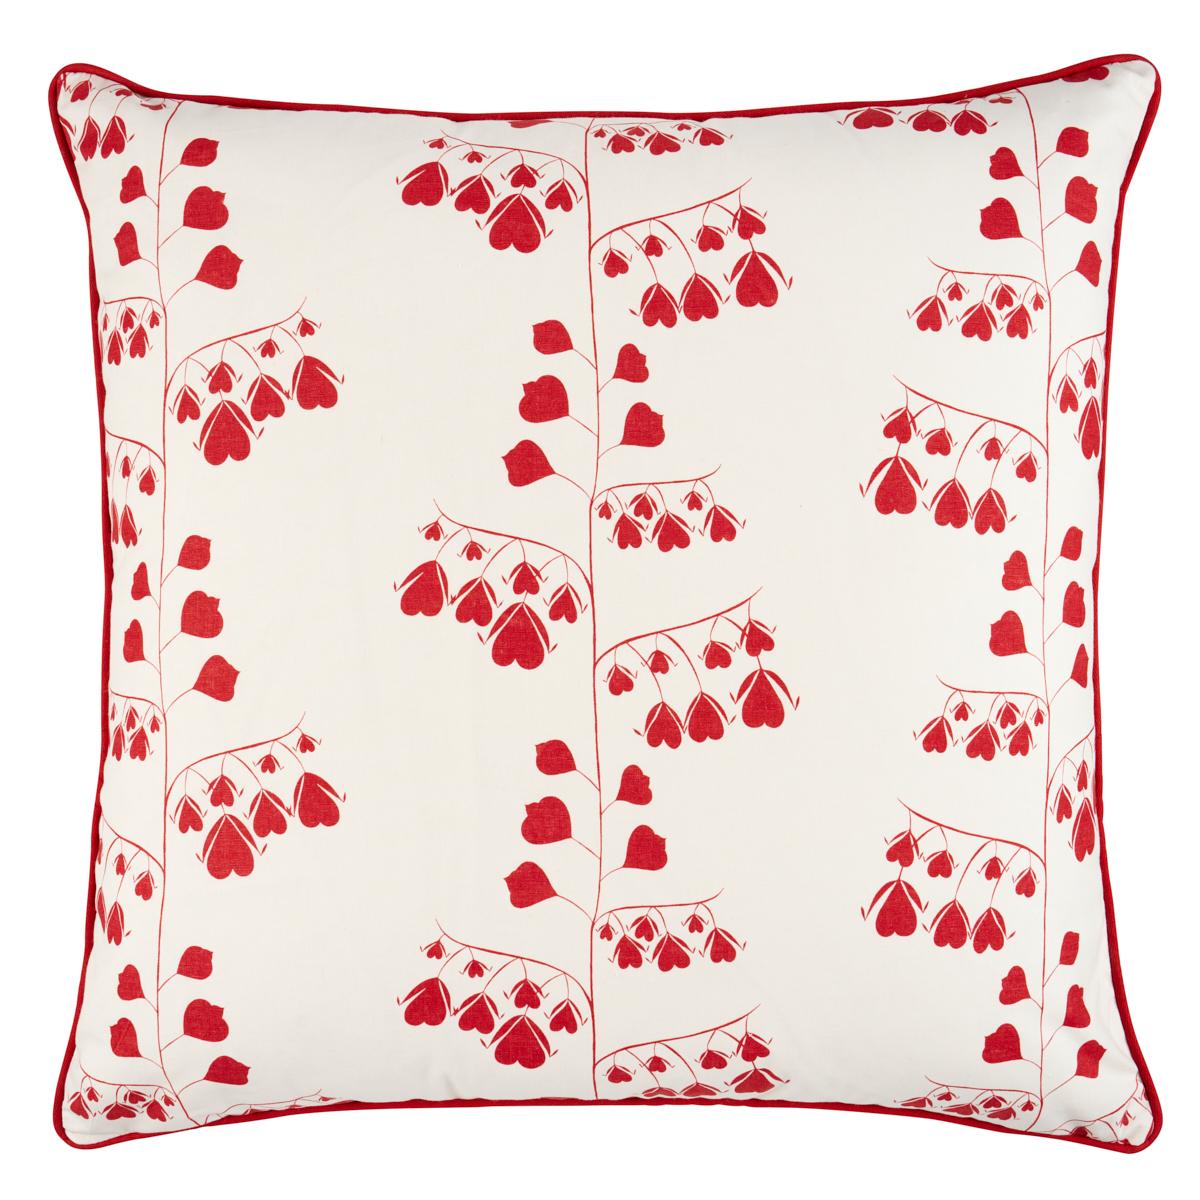 Bleeding Hearts Pillow in Red 24 x 24"